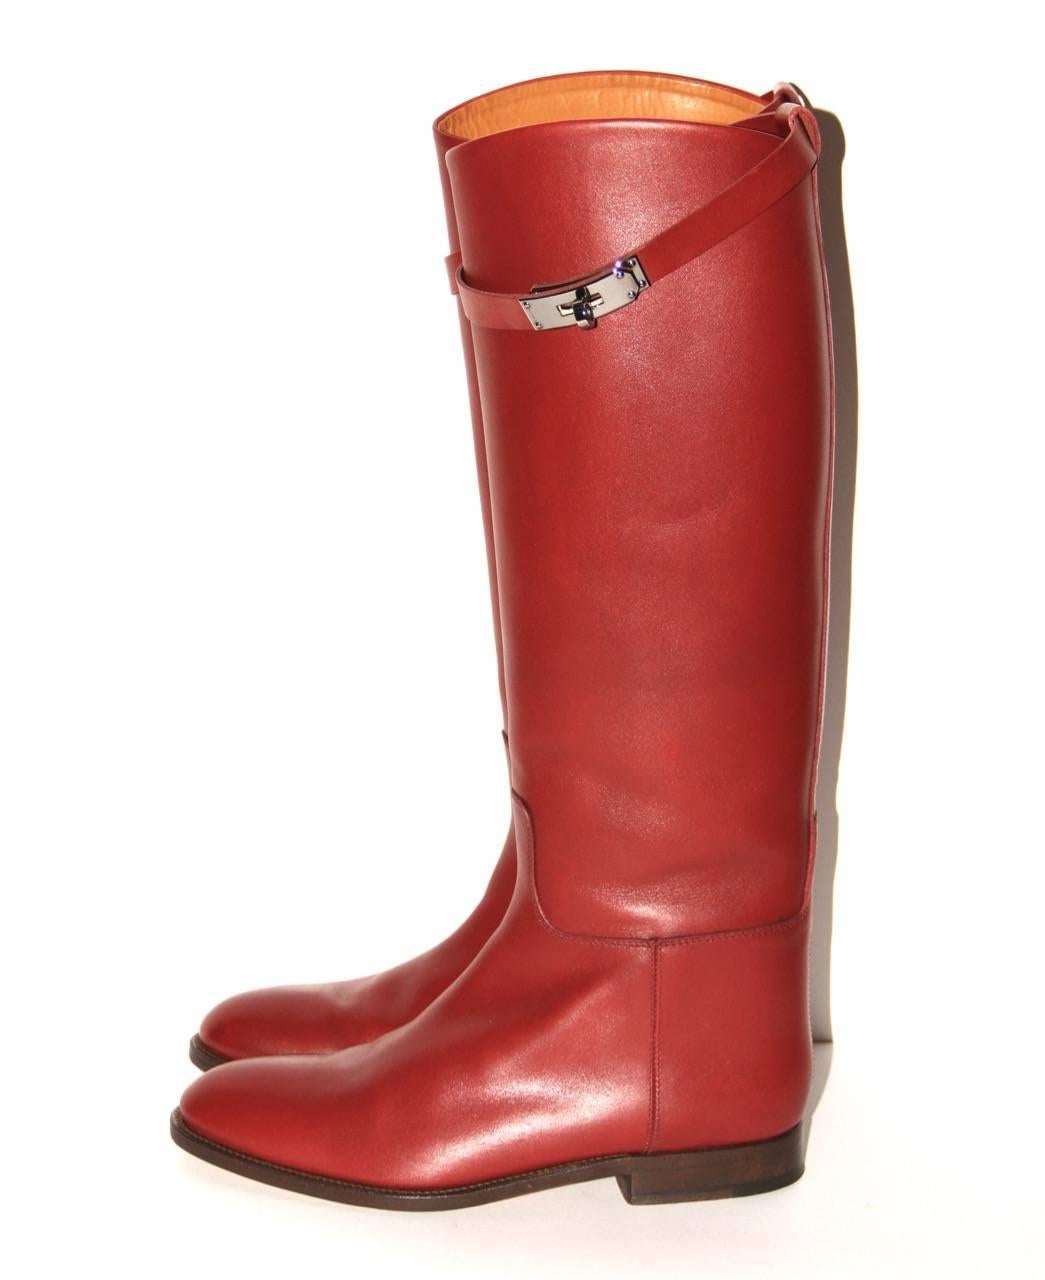 hermes jumping boots review